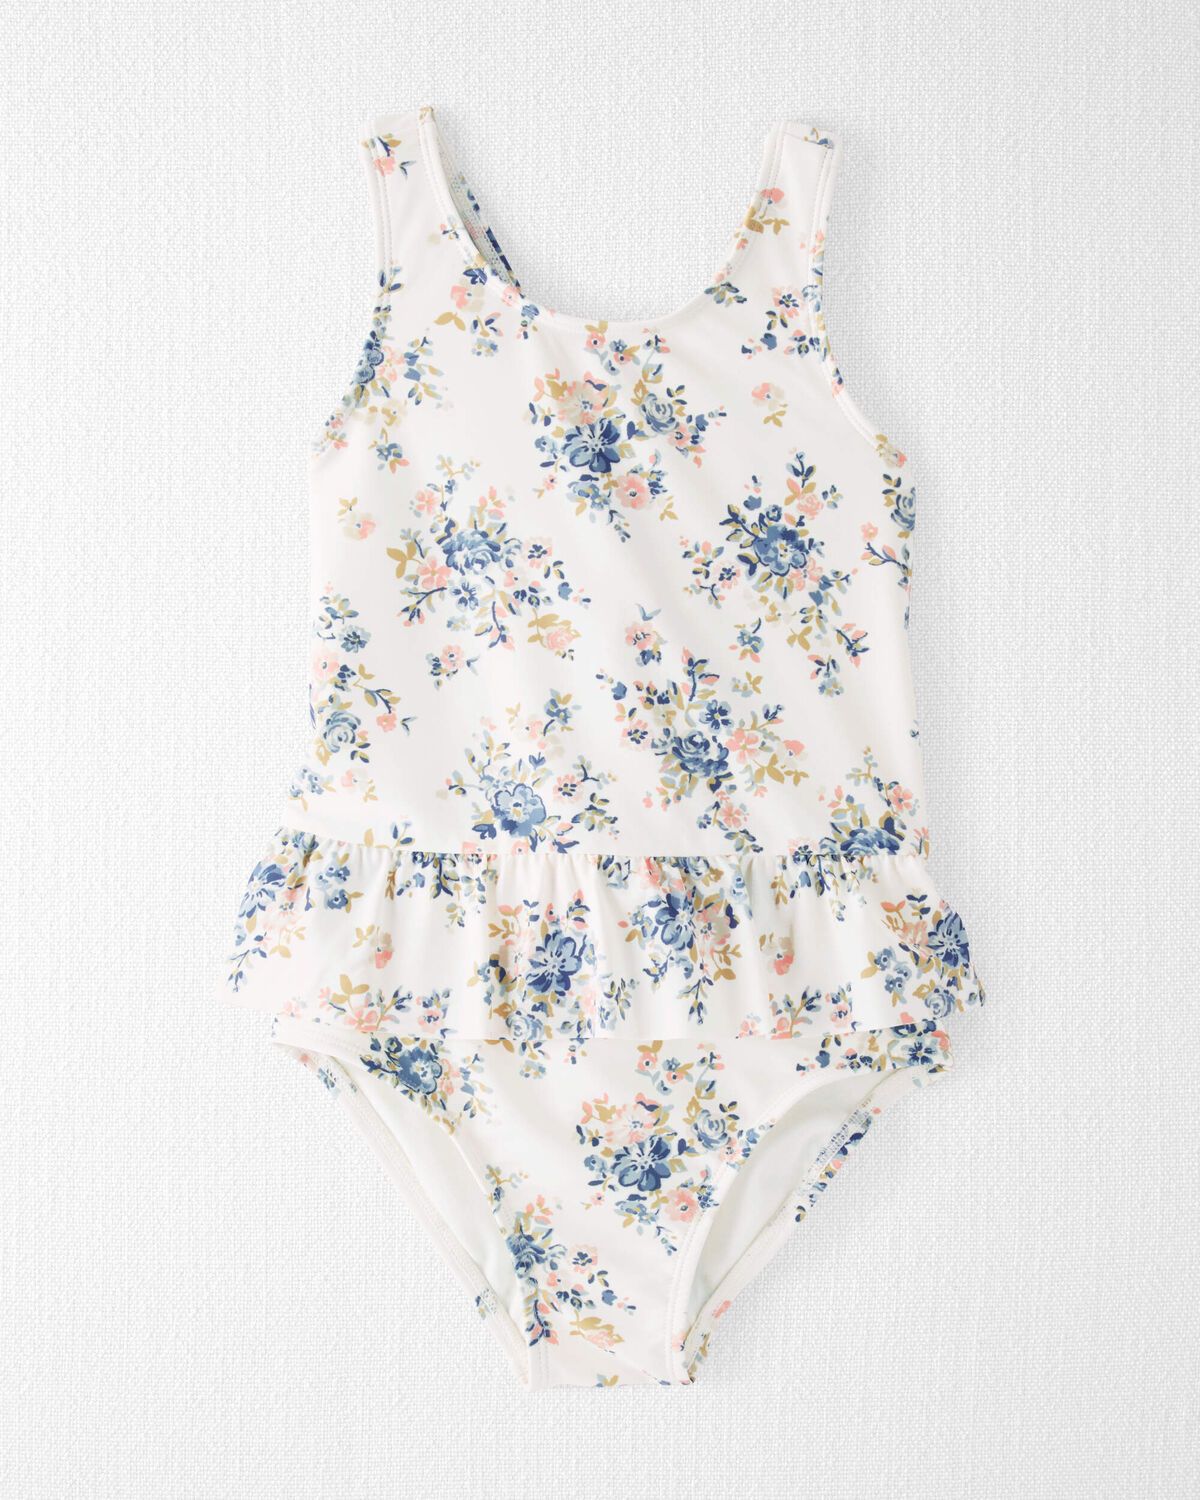 Vintage Floral Print Toddler Recycled Ruffle Swimsuit | carters.com | Carter's